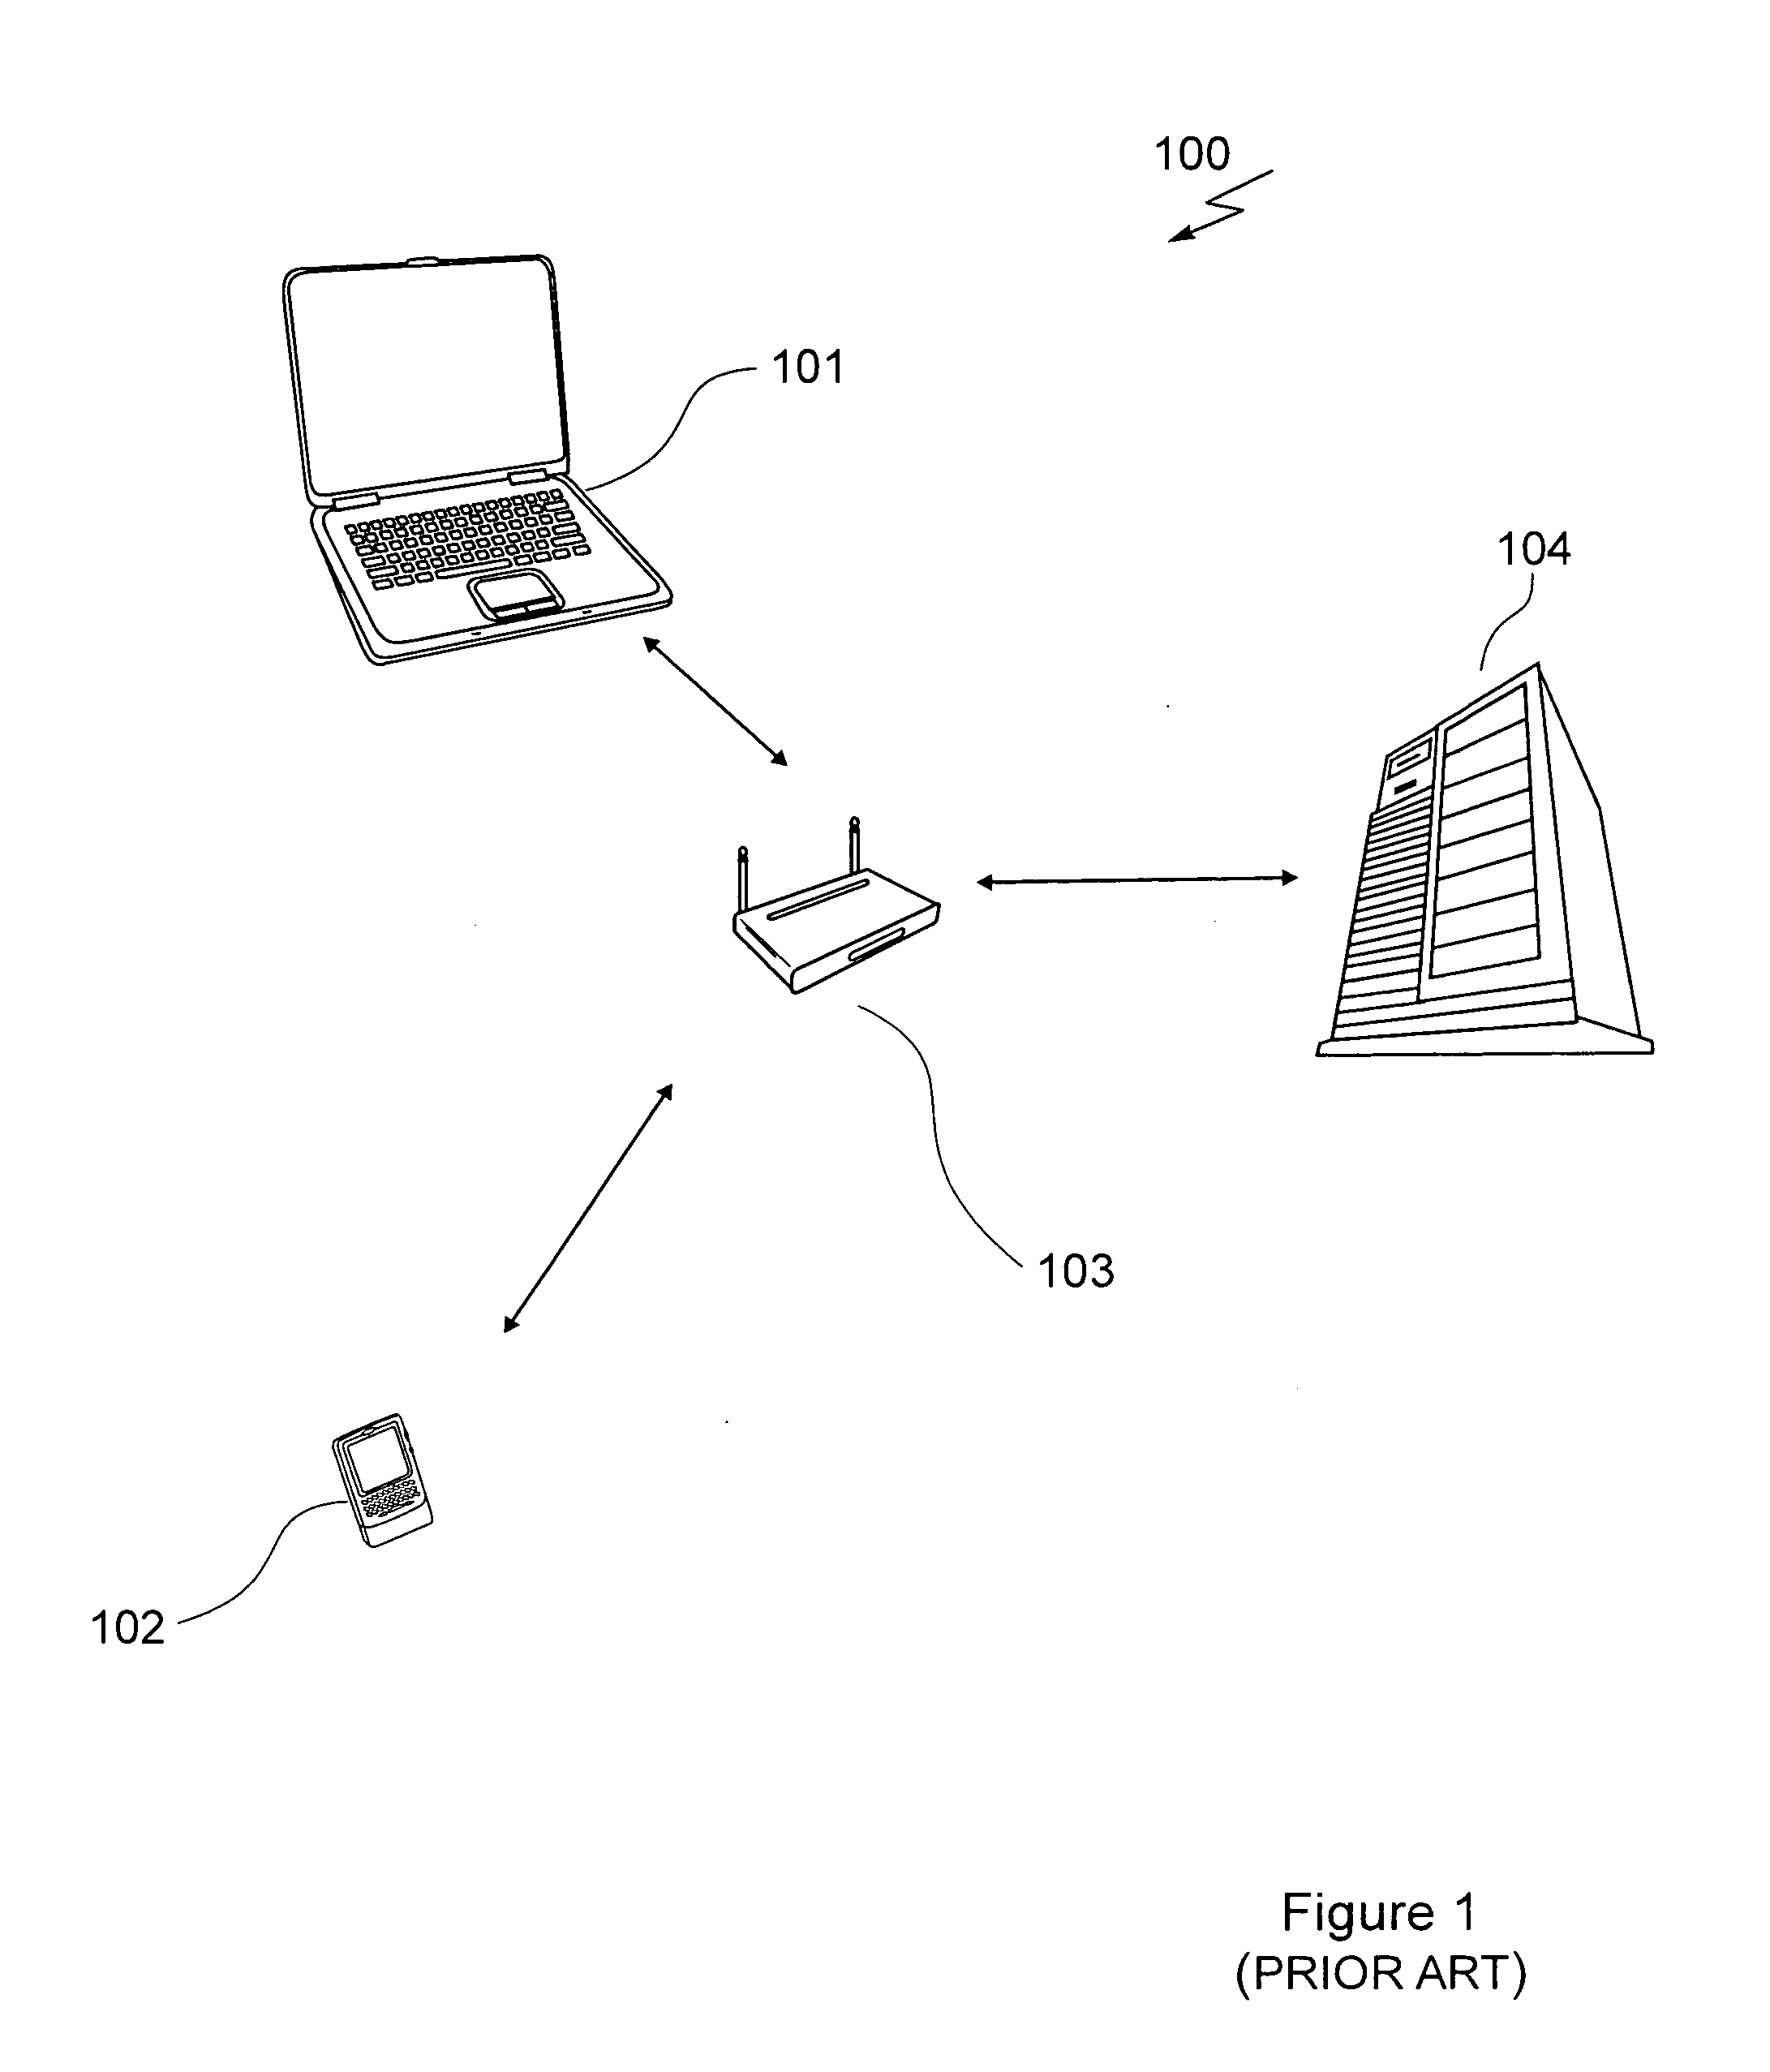 System and method for location tracking using wireless networks